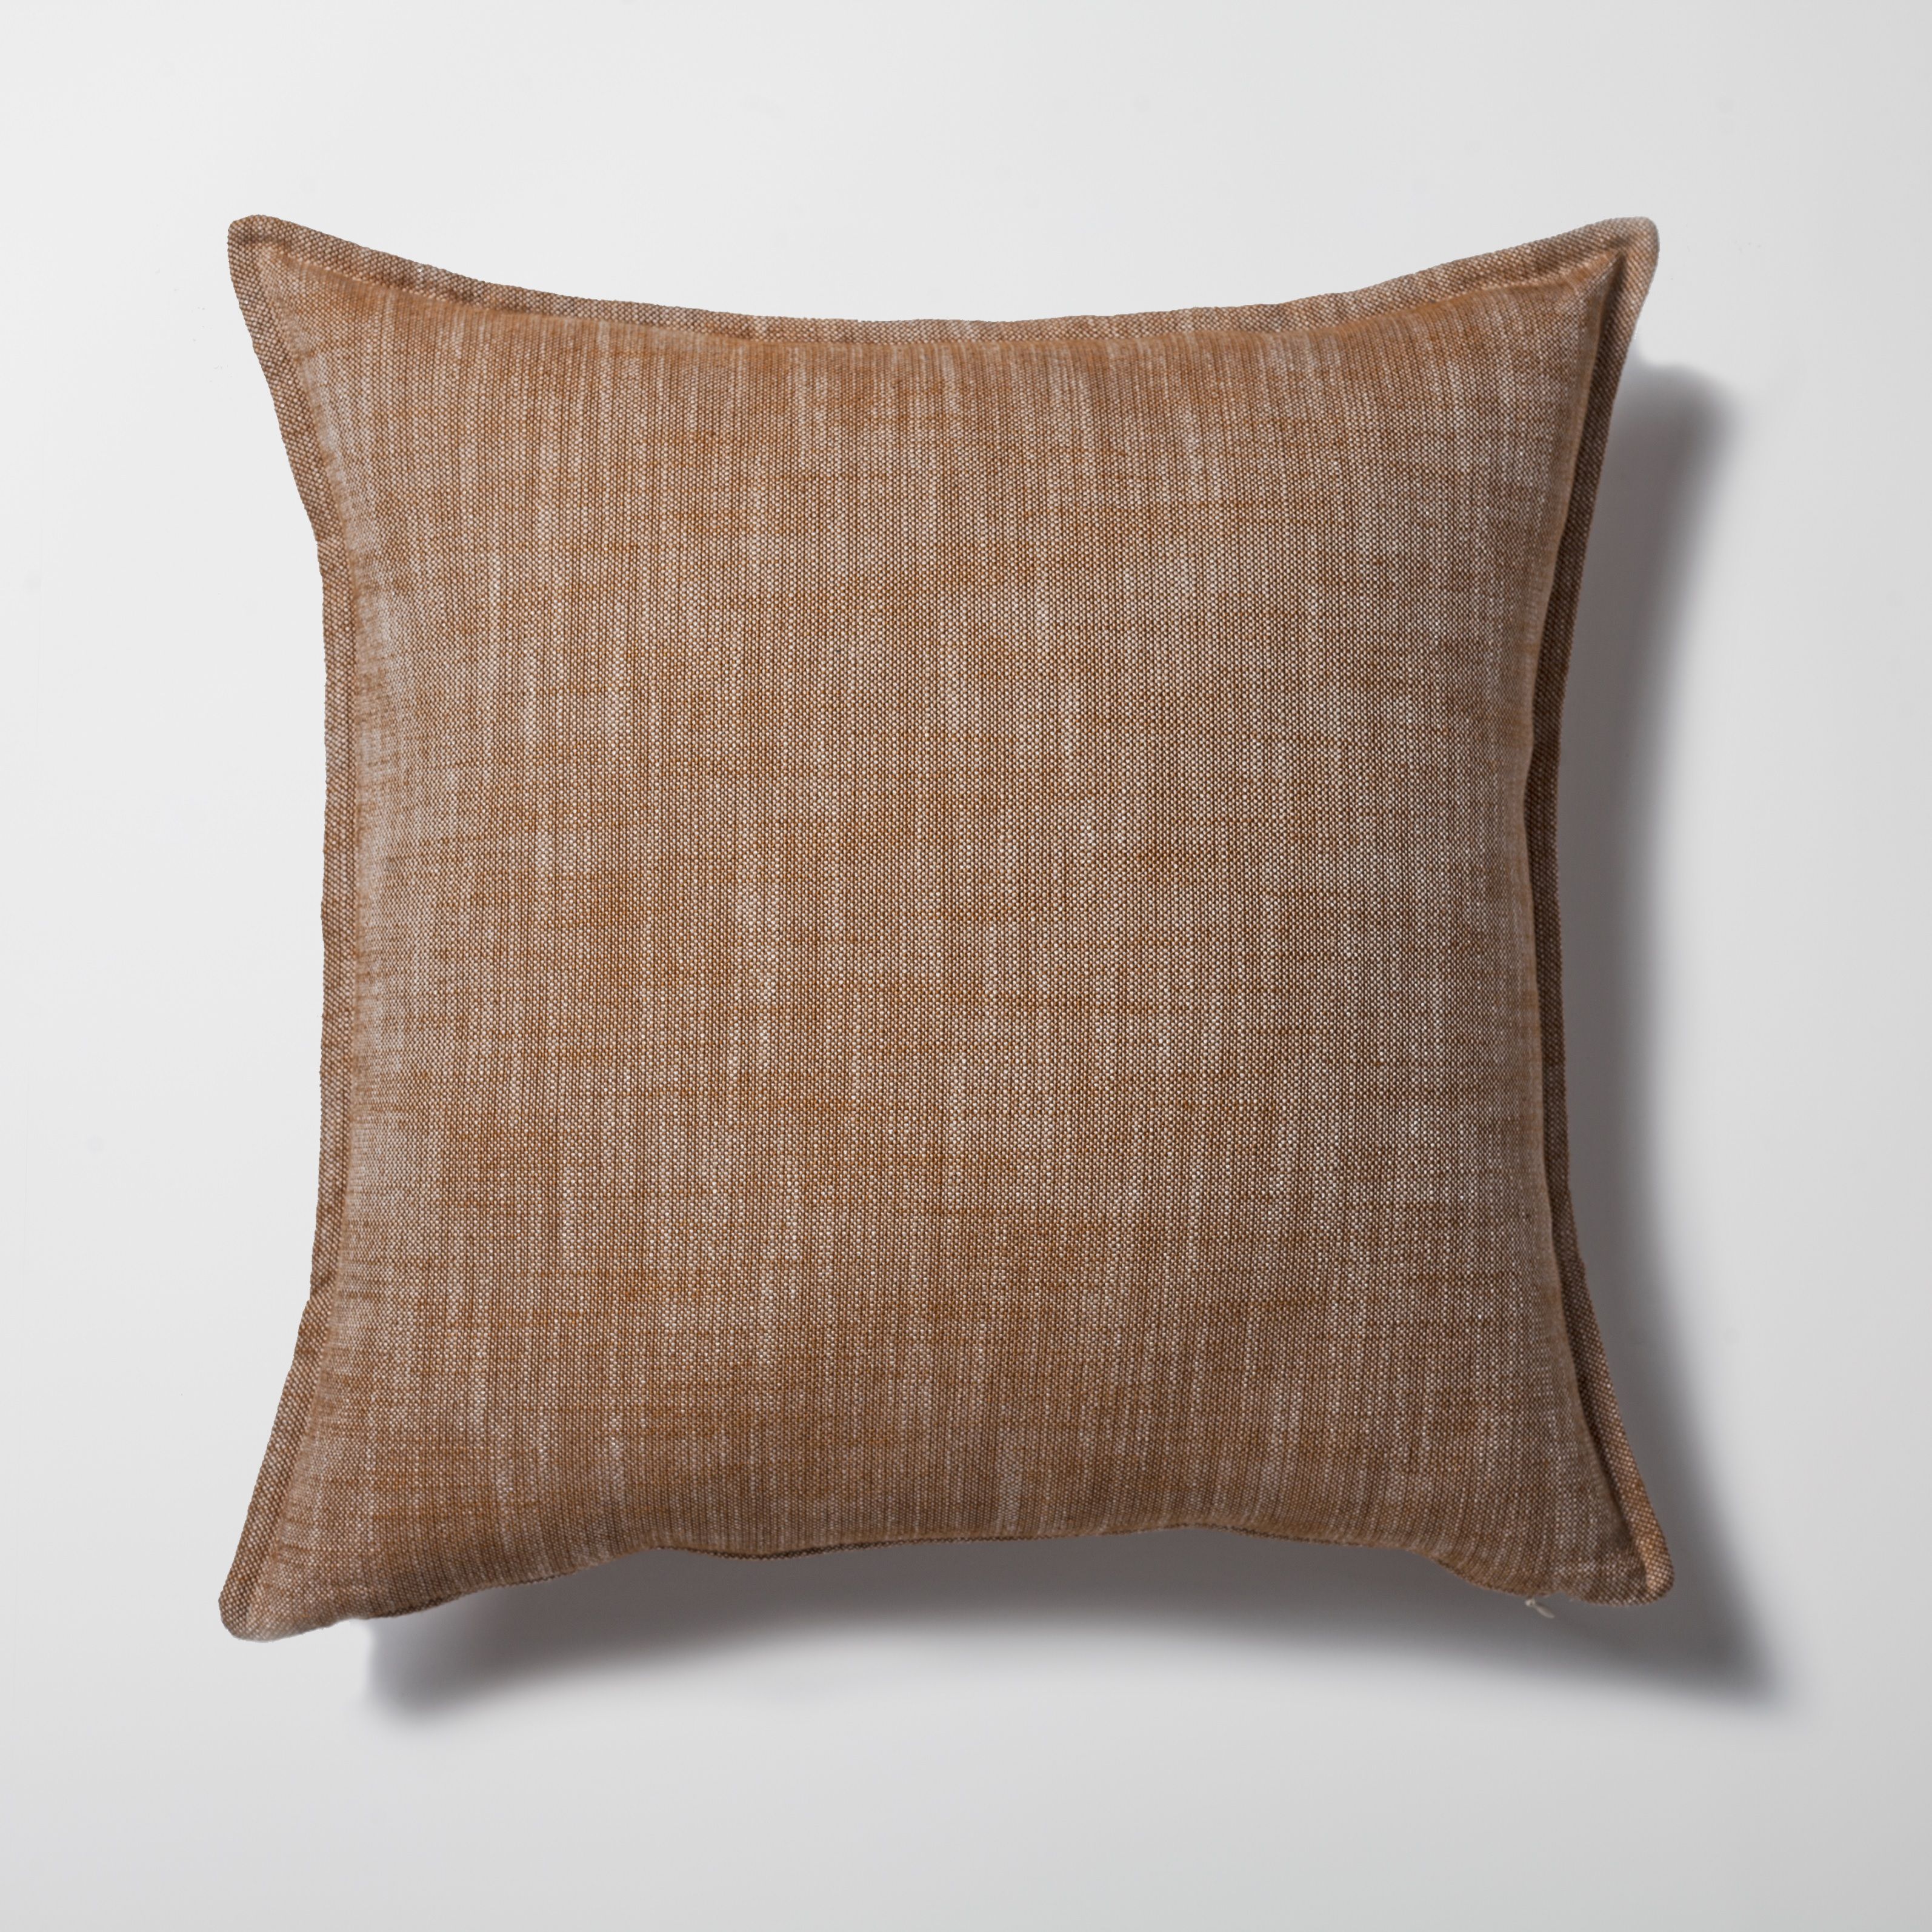 "Porto" - Linen Square Pillow 20x20 Inch - Mustard (Cover Only)